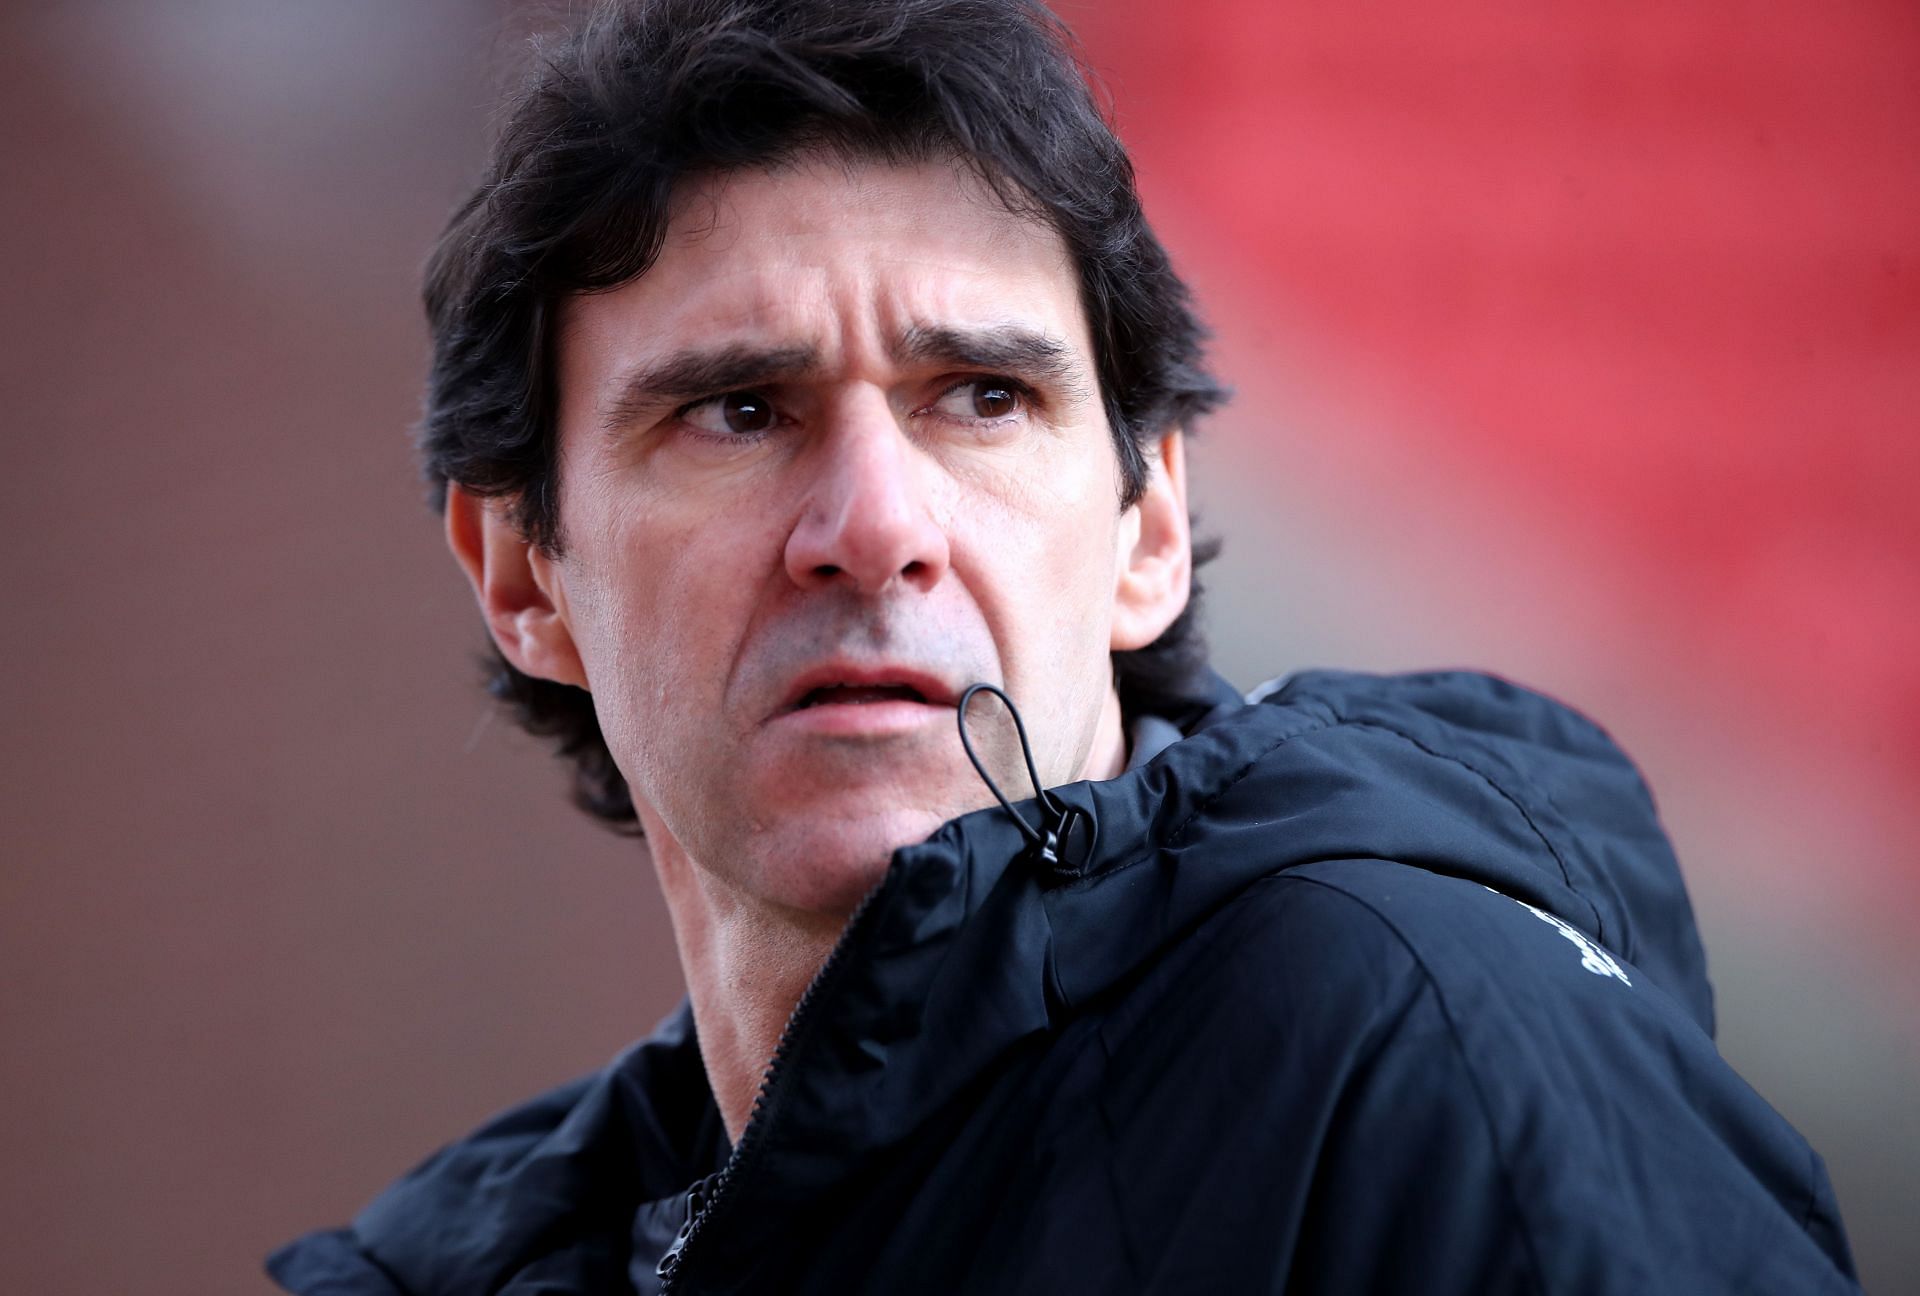 Aitor Karanka also played for both Athletic Bilbao and Real Madrid